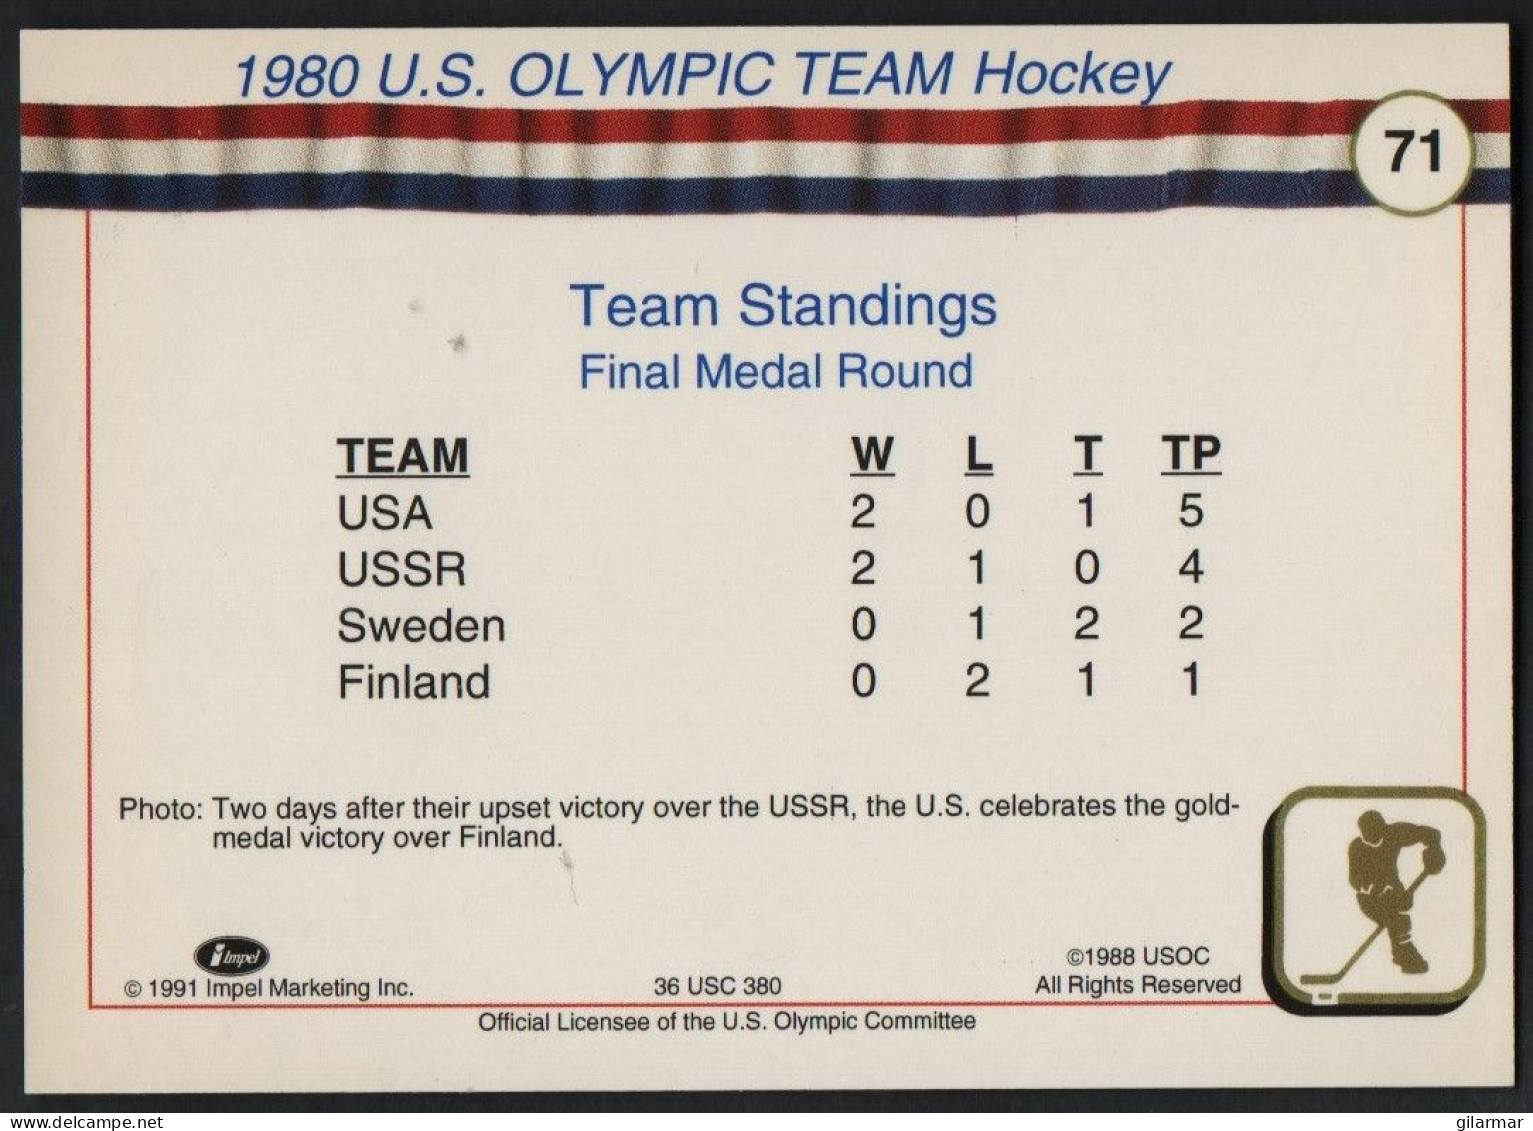 UNITED STATES - U.S. OLYMPIC CARDS HALL OF FAME - ICE HOCKEY - 1980 U.S. OLYMPIC TEAM - # 71 - Trading Cards